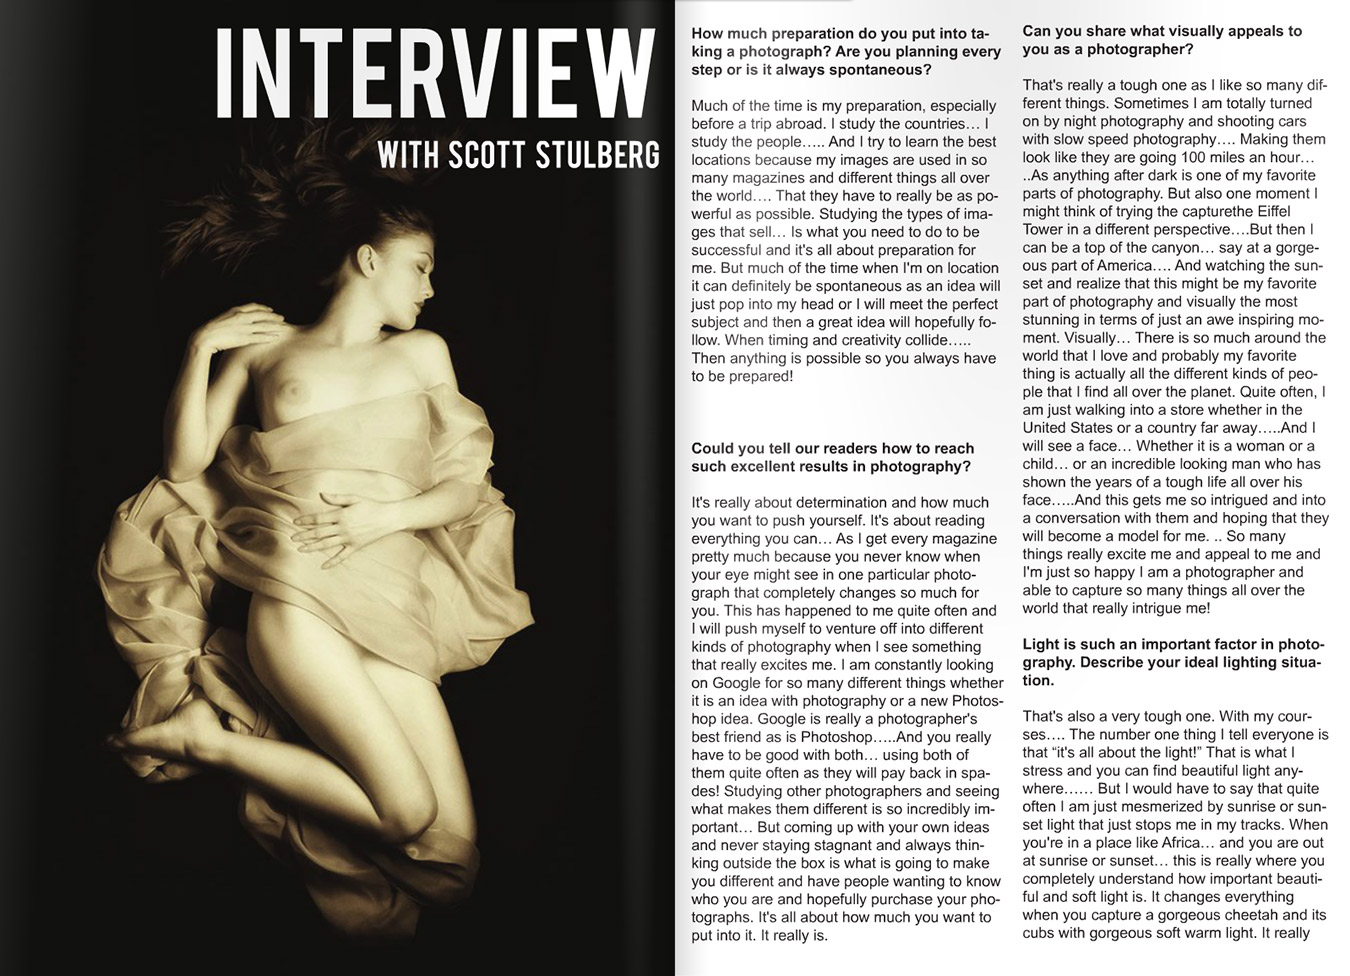 Interview for Dodho Magazine